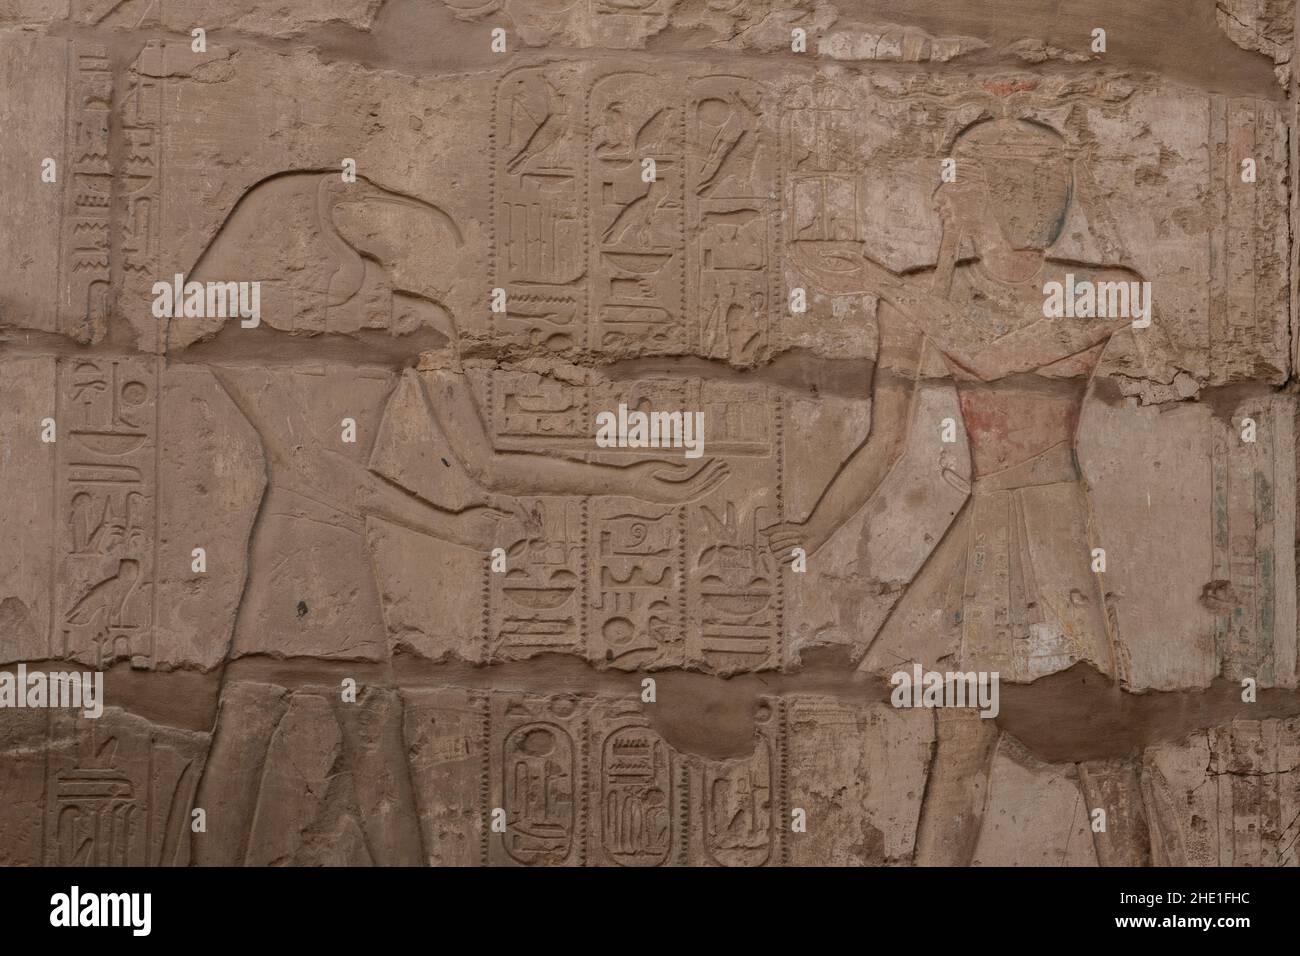 Thoth, an ancient egyptian deity and hieroglyphs at Karnak temple, a famous archeological site in Egypt. Stock Photo